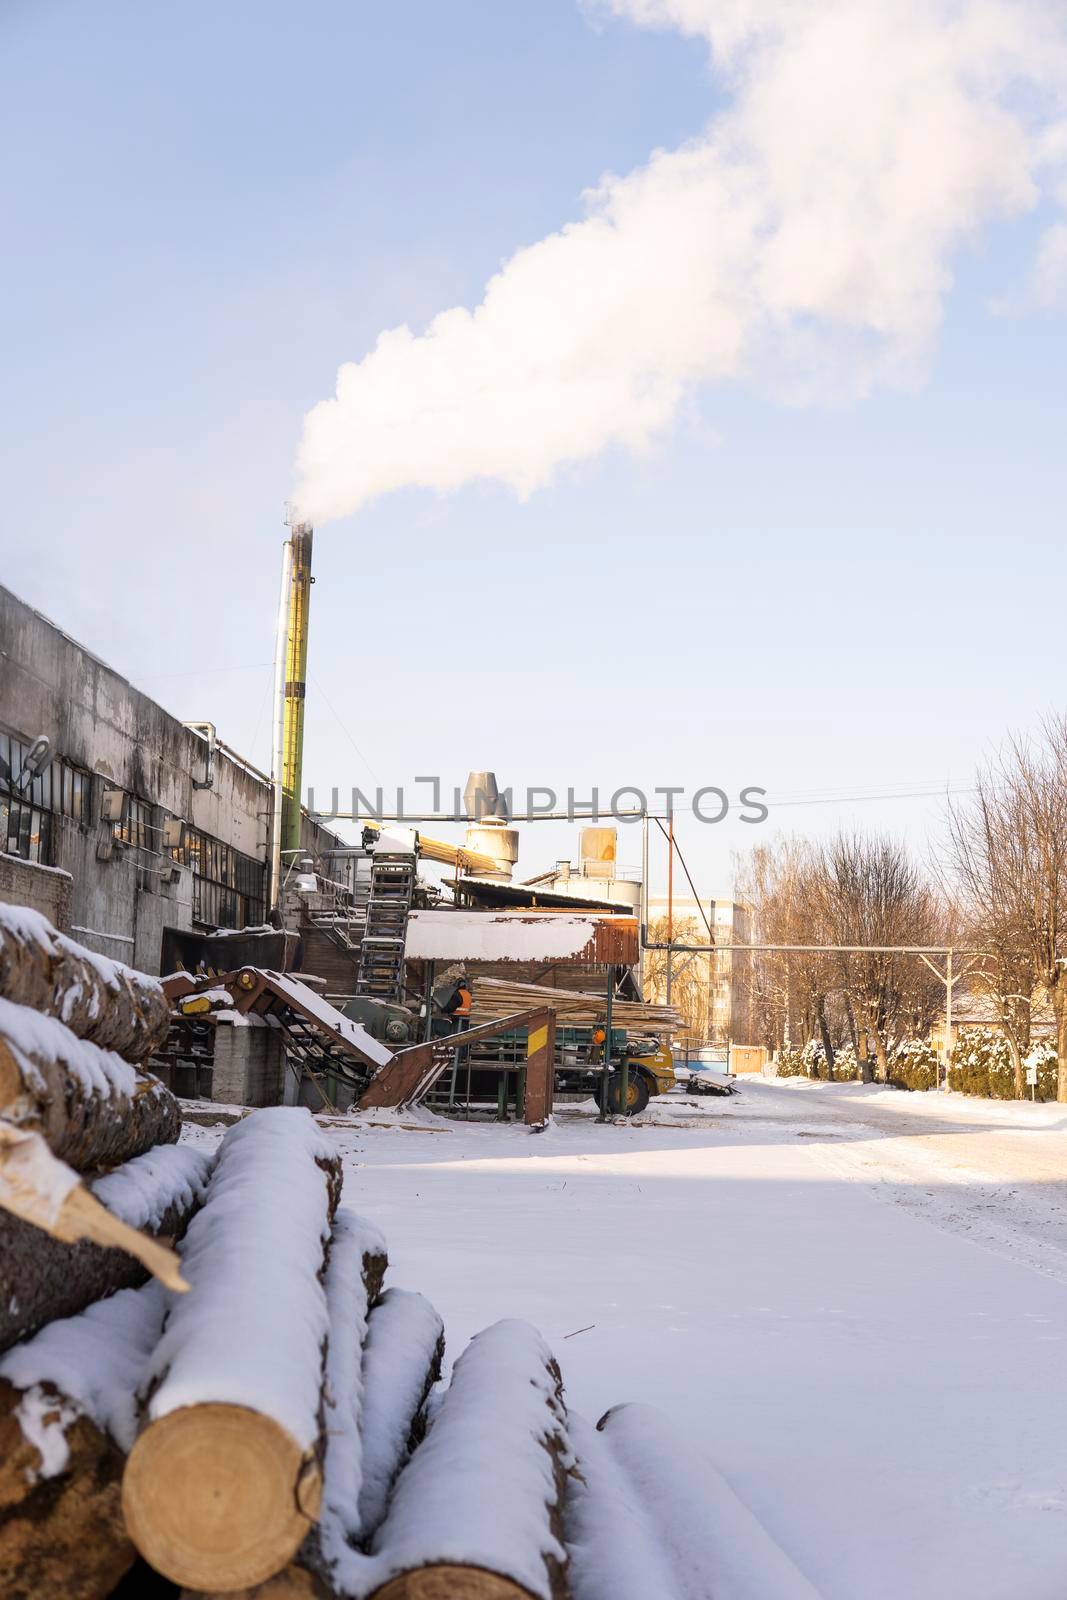 A pile of logs on a sawmill under the layer of snow in the winter season